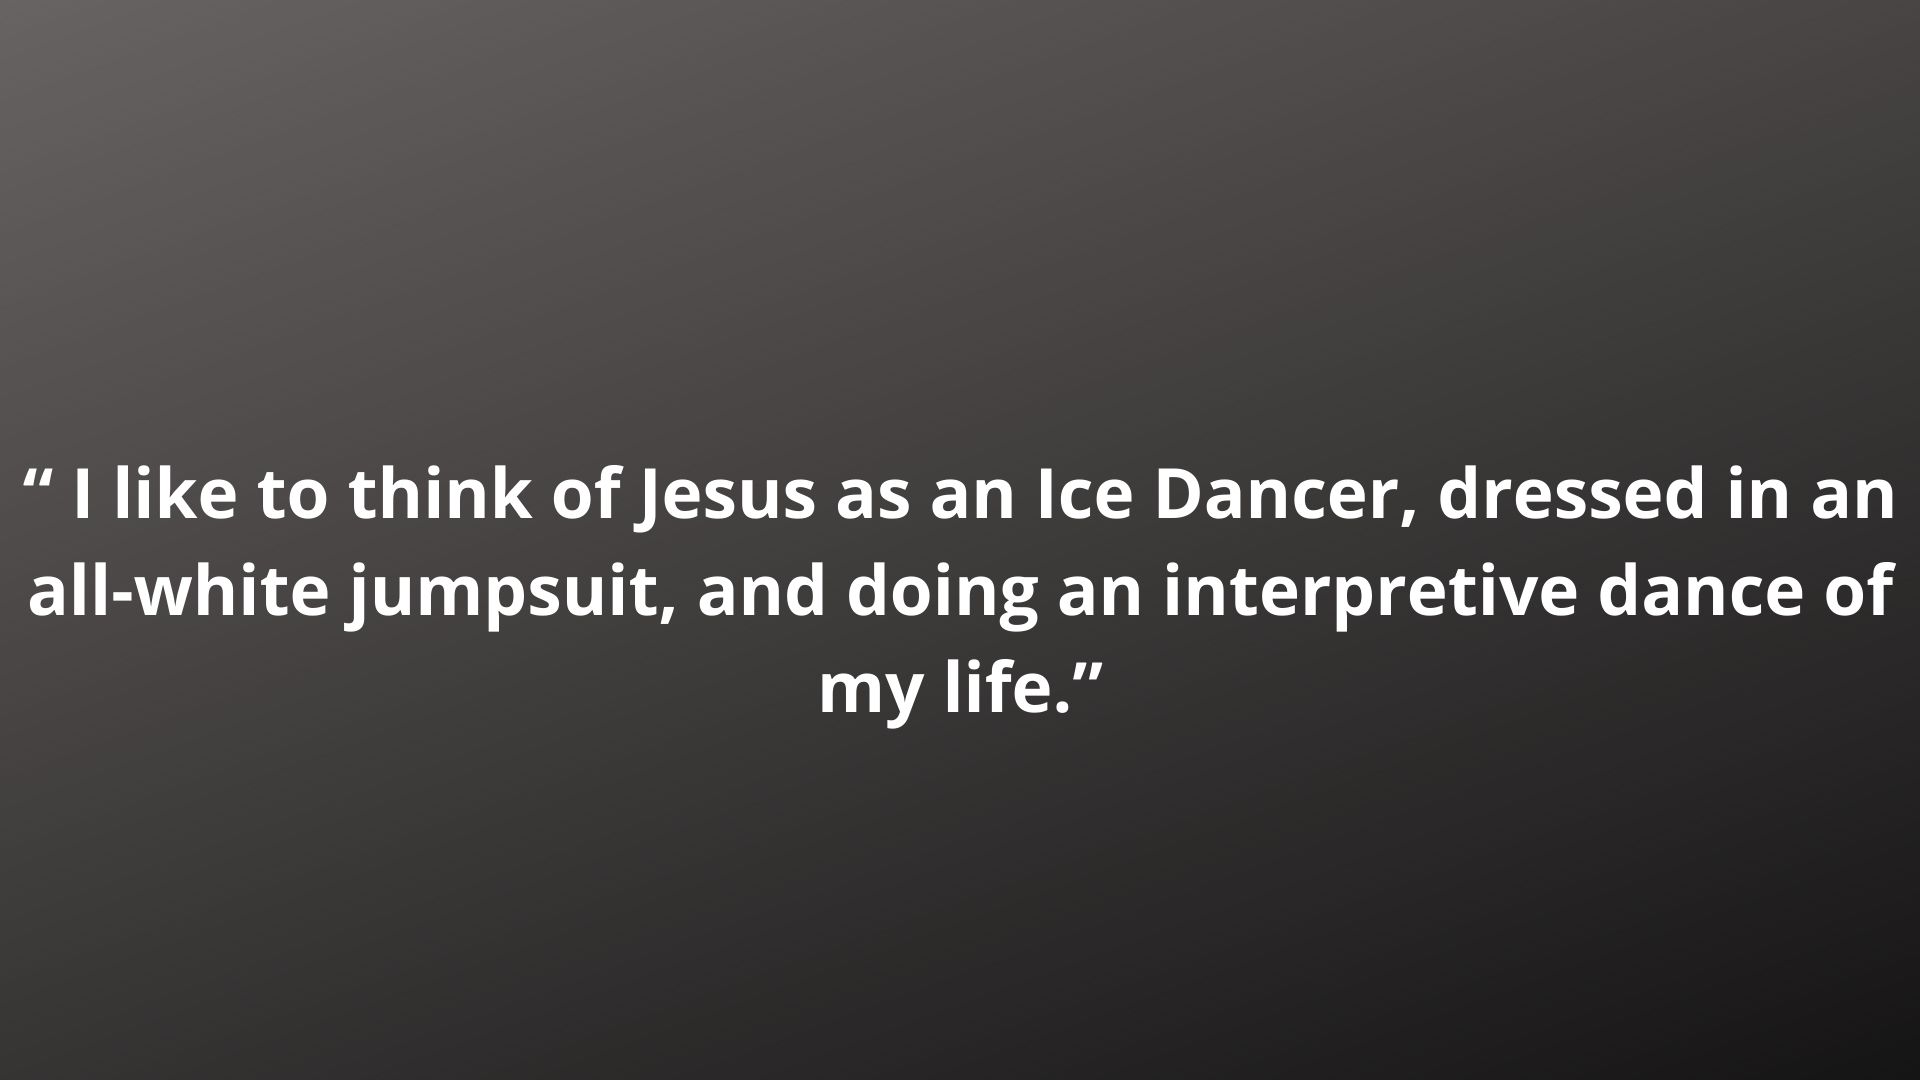 “ I like to think of Jesus as an Ice Dancer, dressed in an all-white jumpsuit, and doing an interpretive dance of my life.”